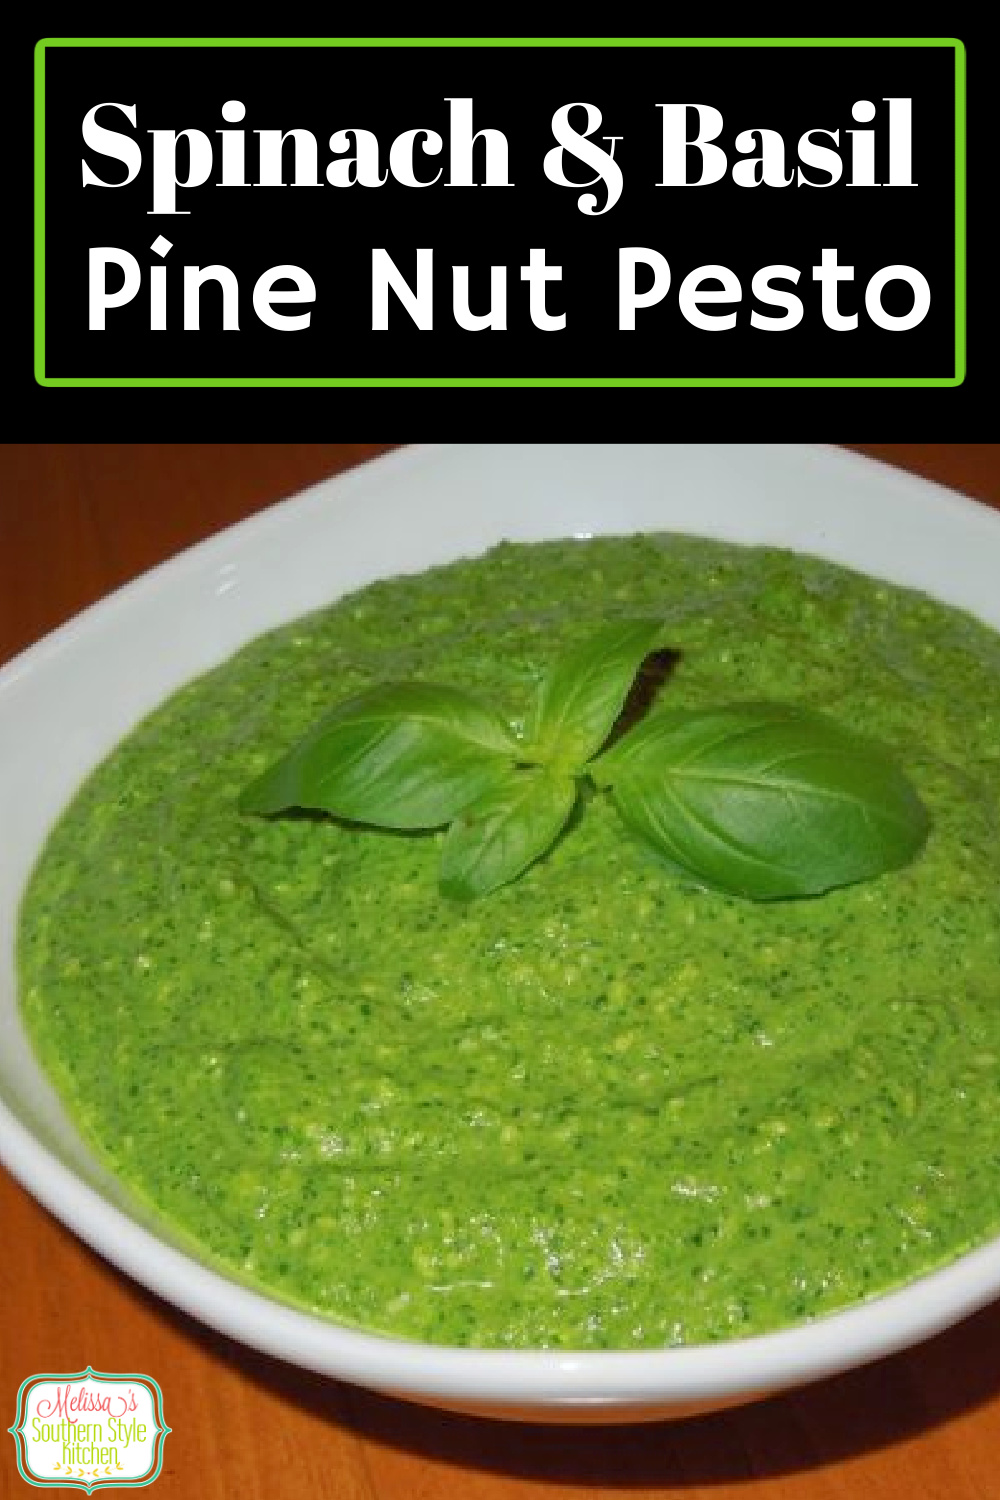 This homemade Spinach Basil and Pine Nut Pesto is packed with flavor. Toss it with pasta or use as a condiment for sandwiches and more #homemadepesto #basilpesto #pinenuts #pestorecipes #italianpesto #condiments #spinachpesto #spinachbasilpesto via @melissasssk